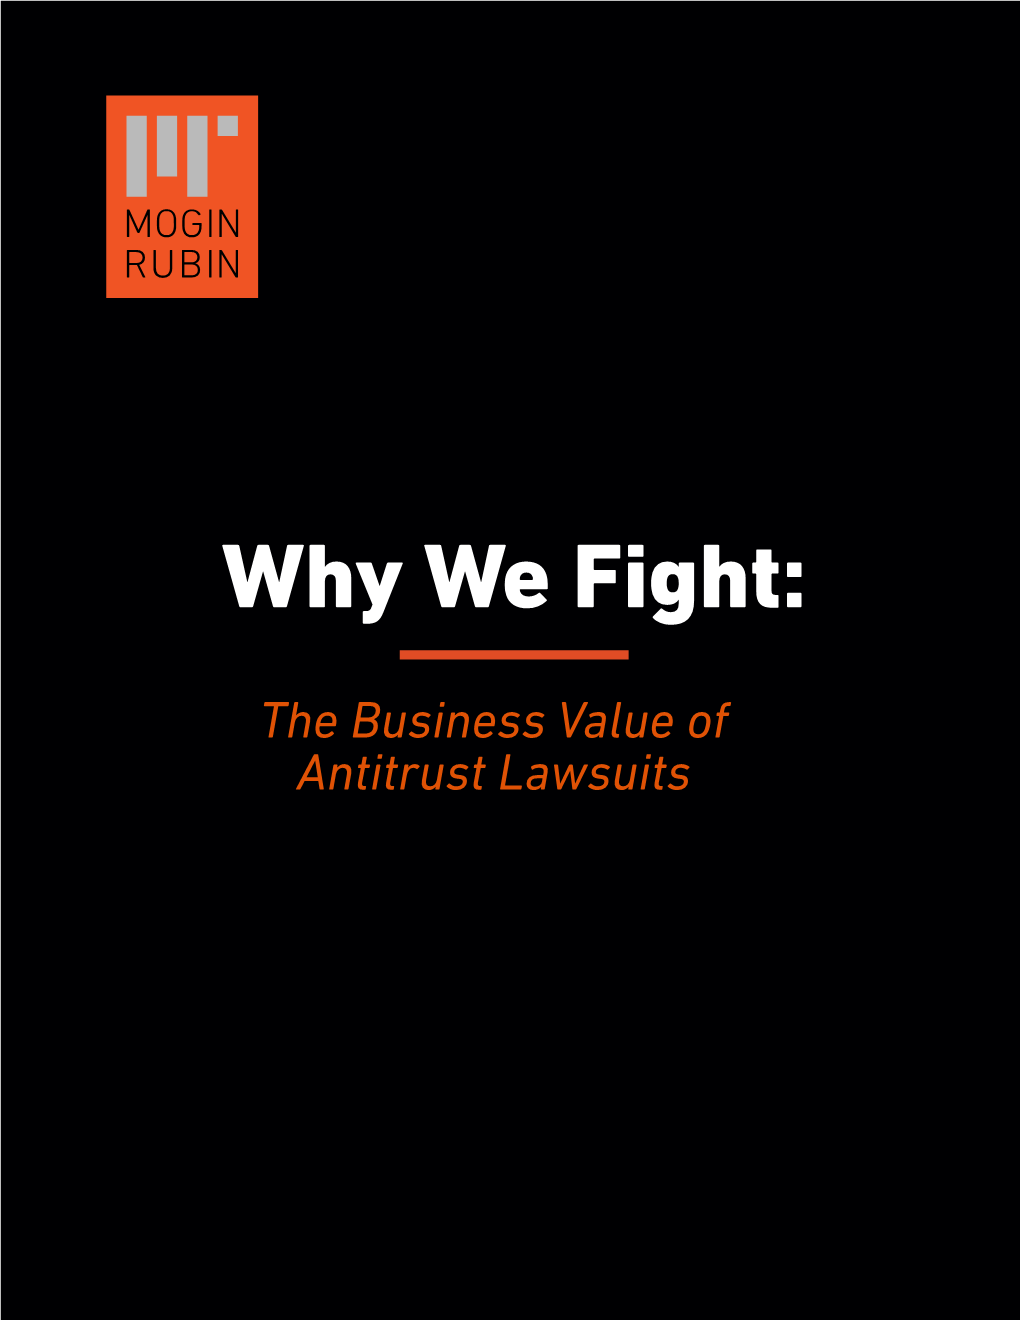 Why We Fight the Business Value of Antitrust Lawsuits